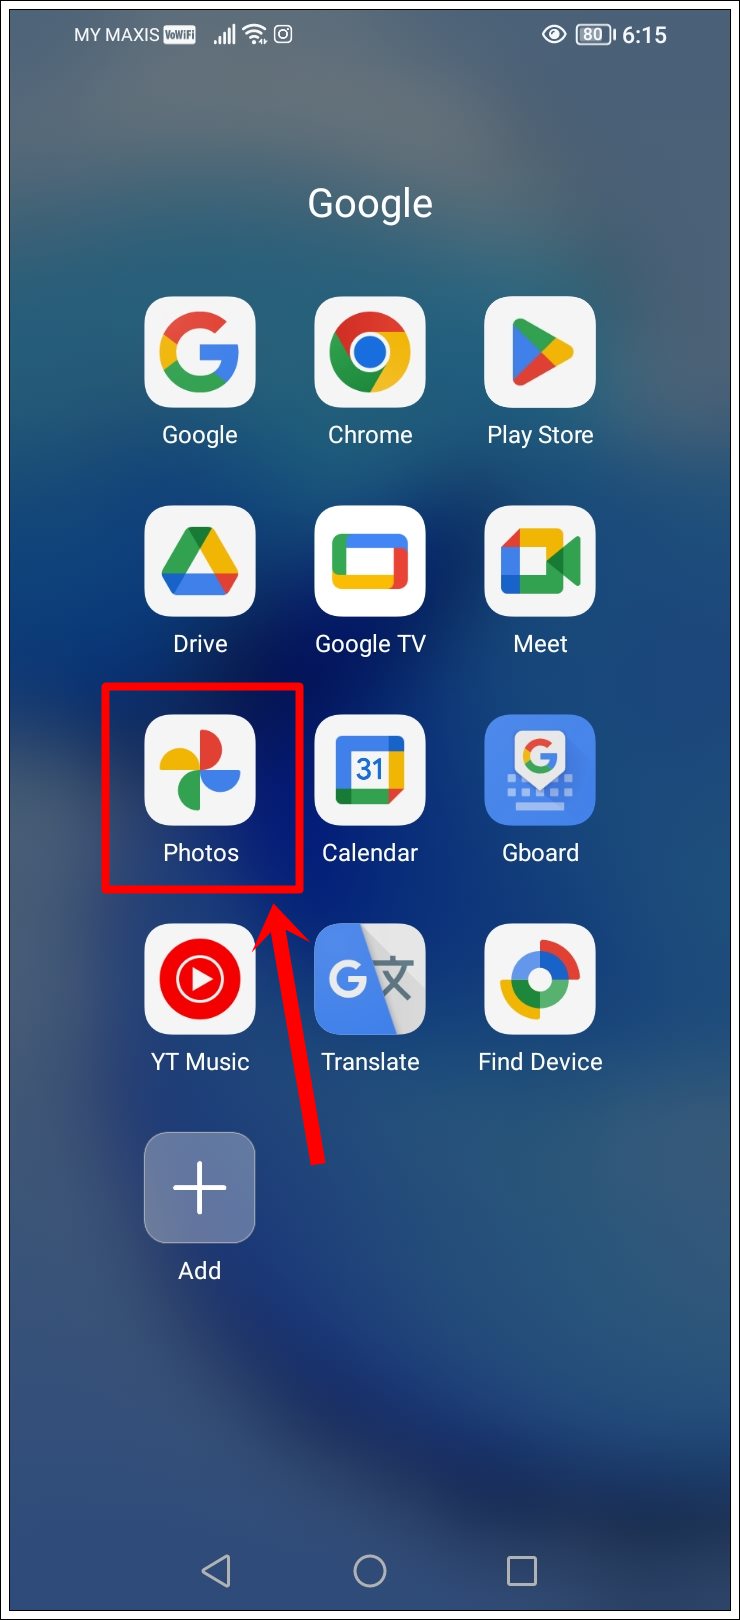 This is a screenshot from a mobile device, with the Google Photos app icon highlighted.